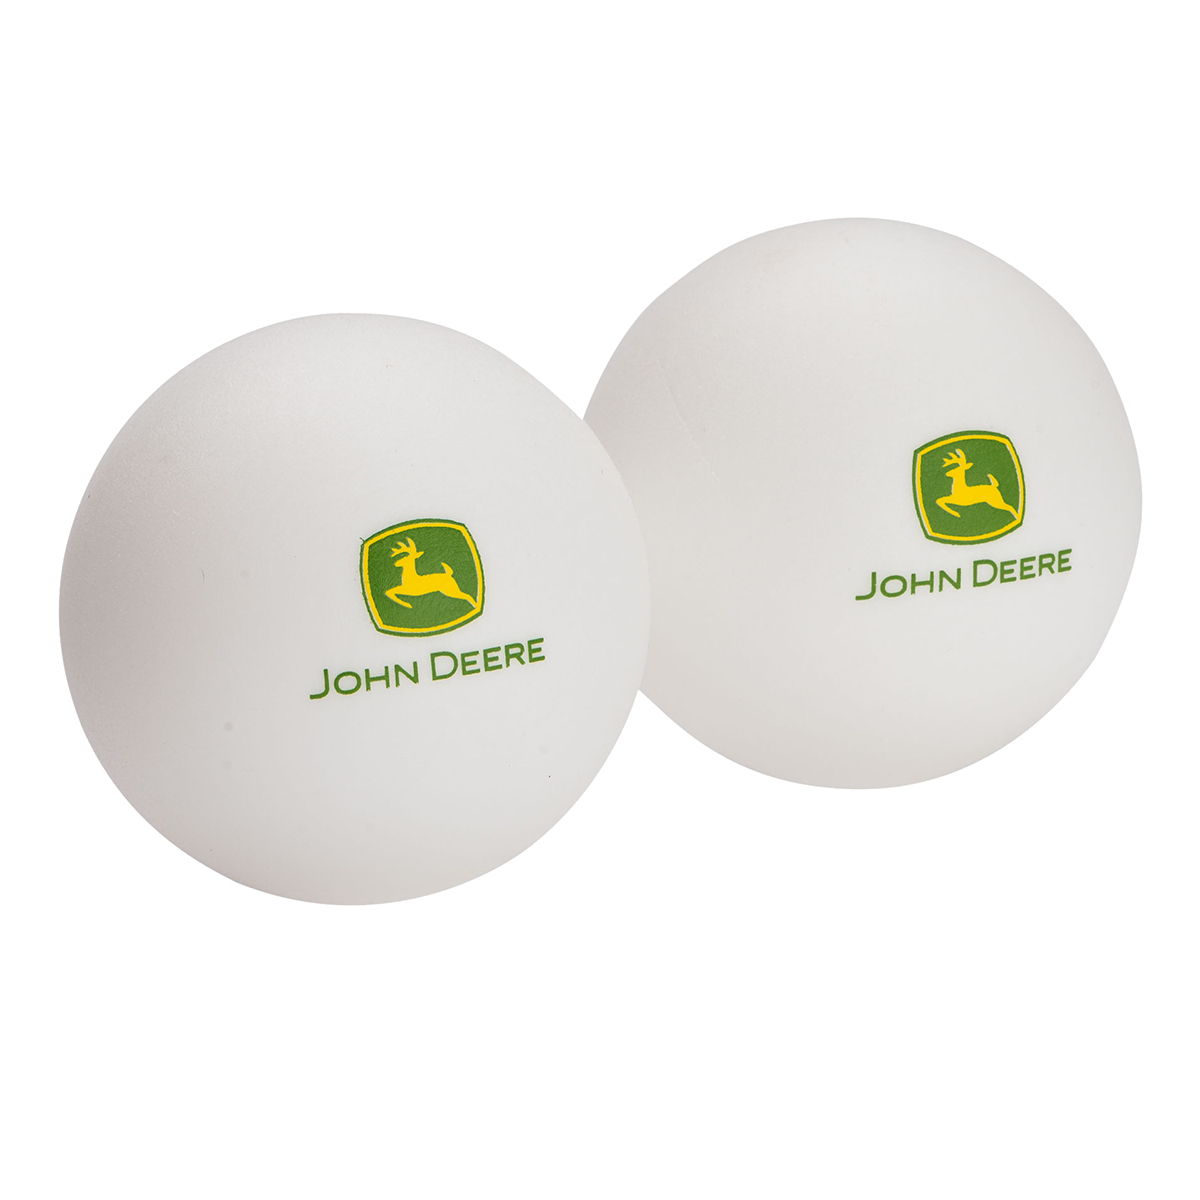 Ping Pong Balls Set Of 2 For The Home John Deere Products